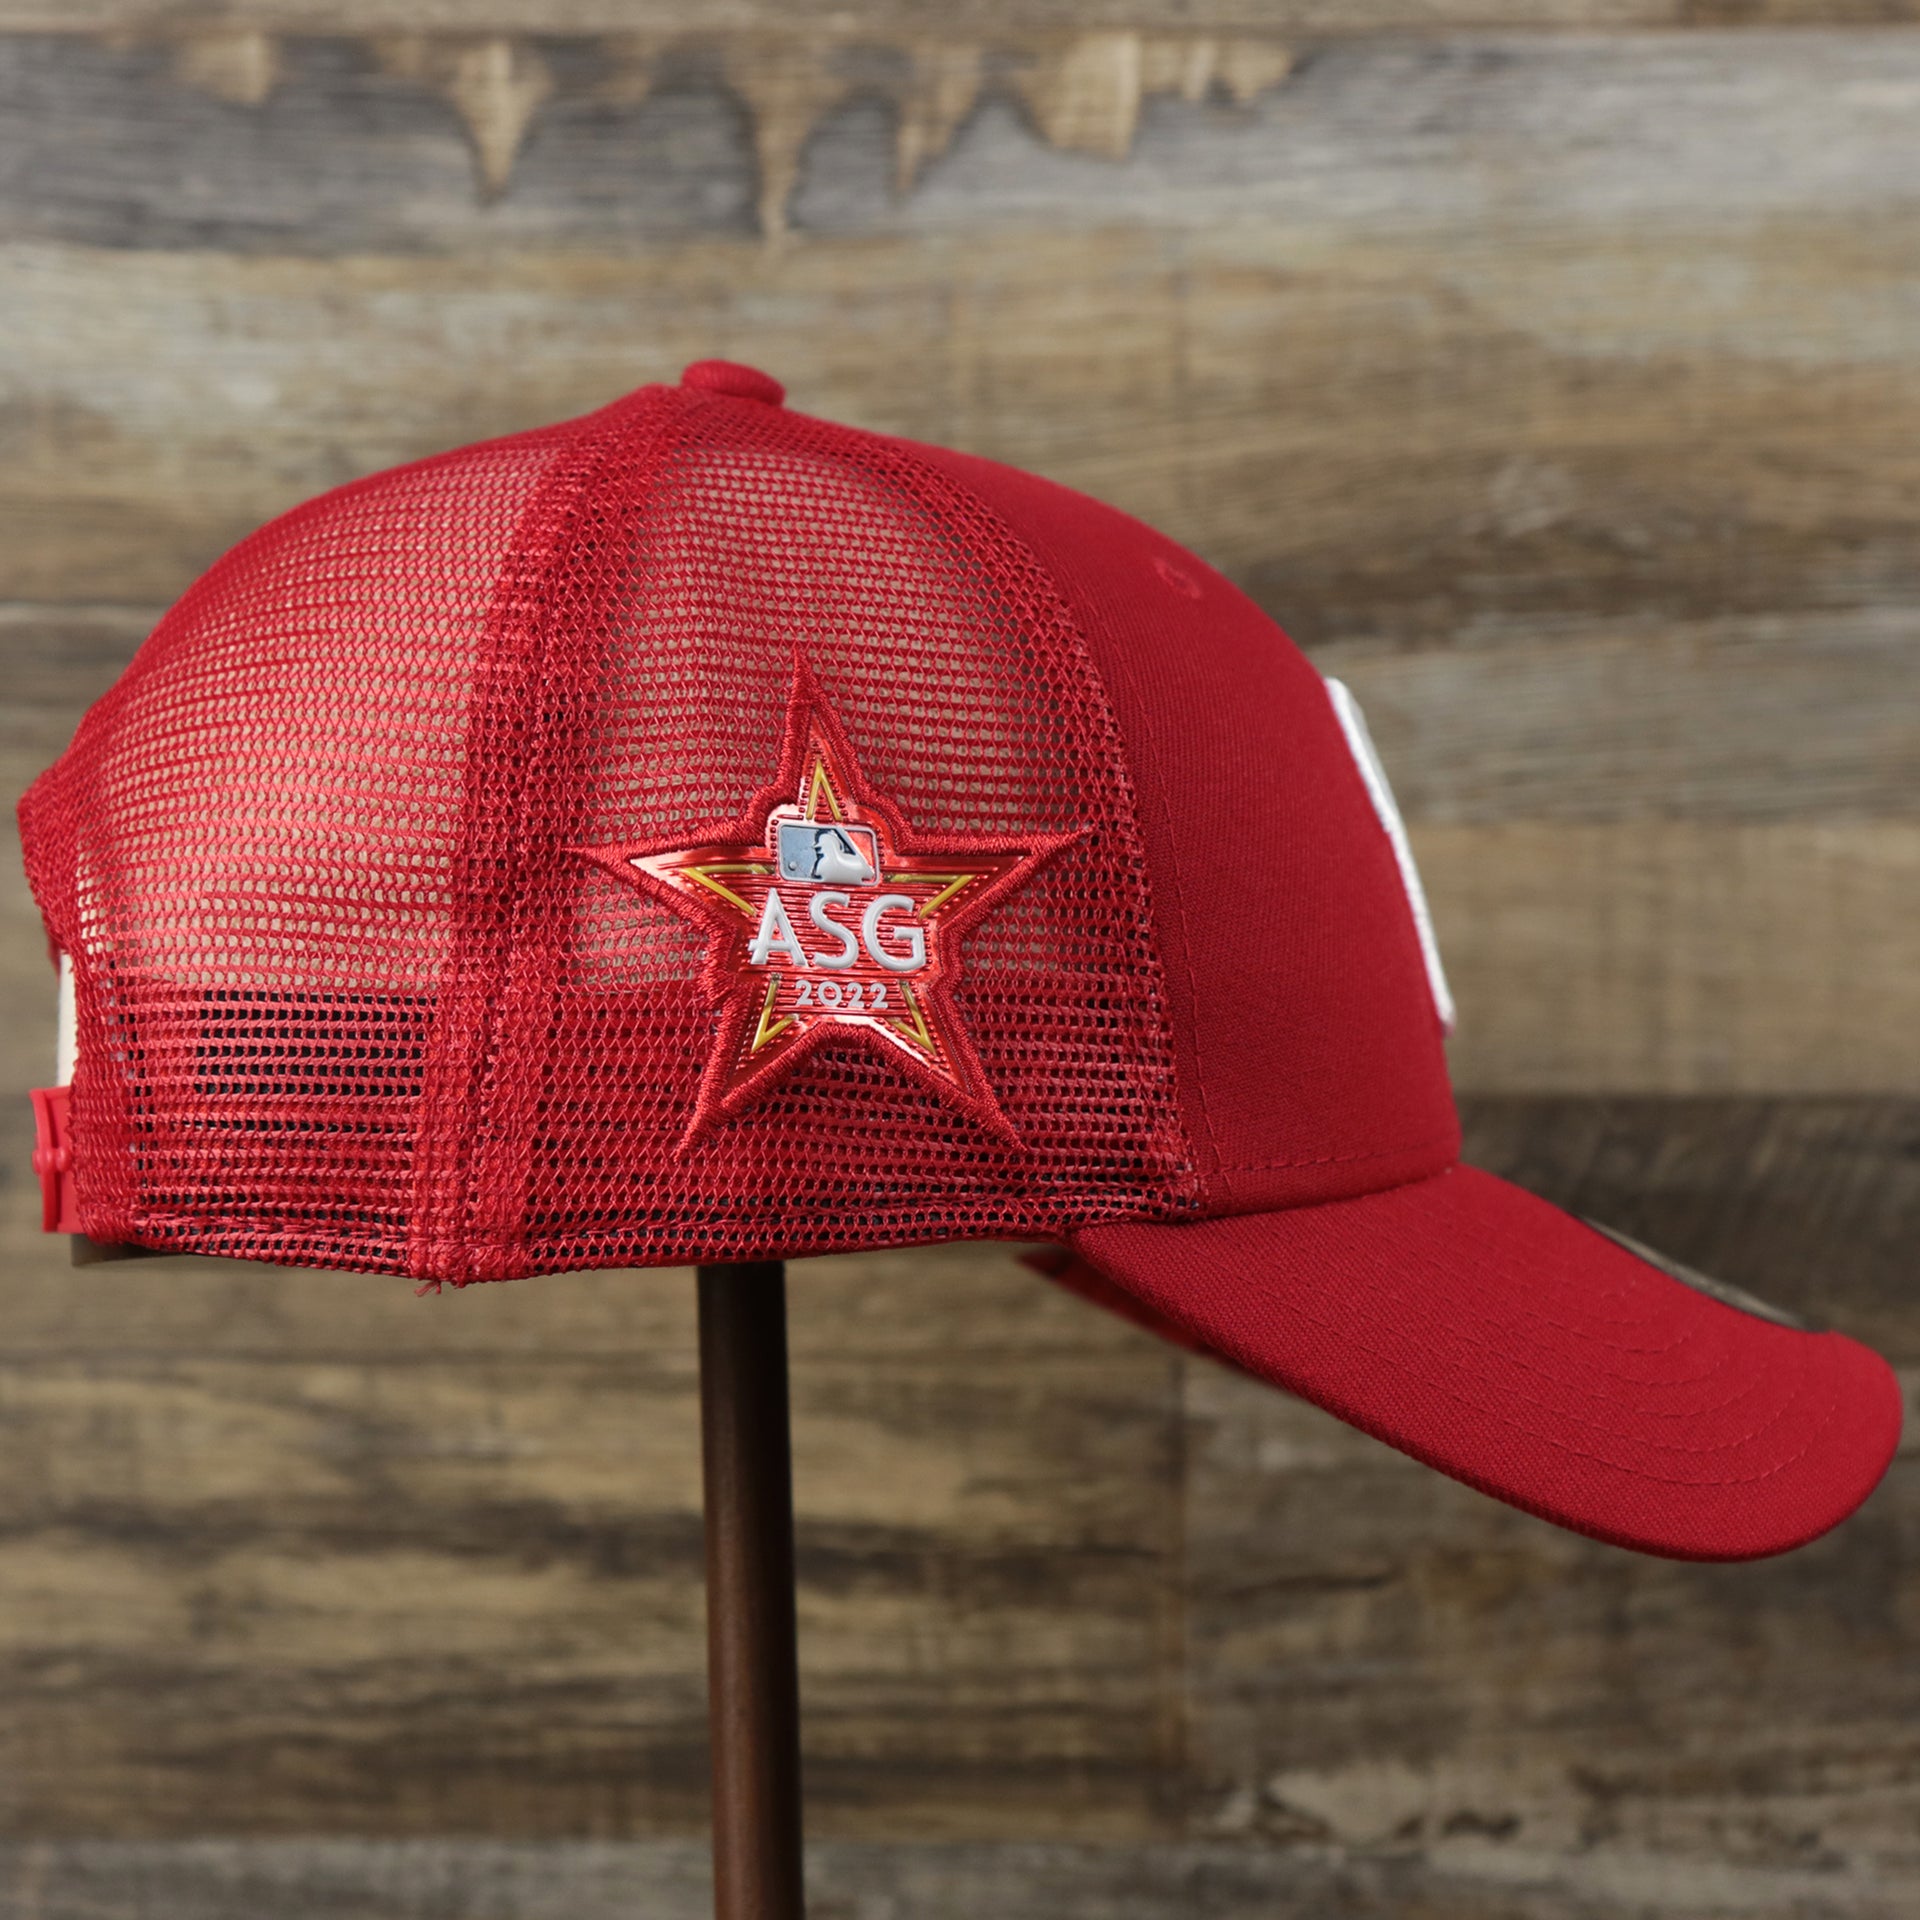 The Wearer's right on the Philadelphia Phillies Metallic All Star Game MLB 2022 Side Patch 9Forty Mesh Trucker | ASG 2022 Red Trucker Hat